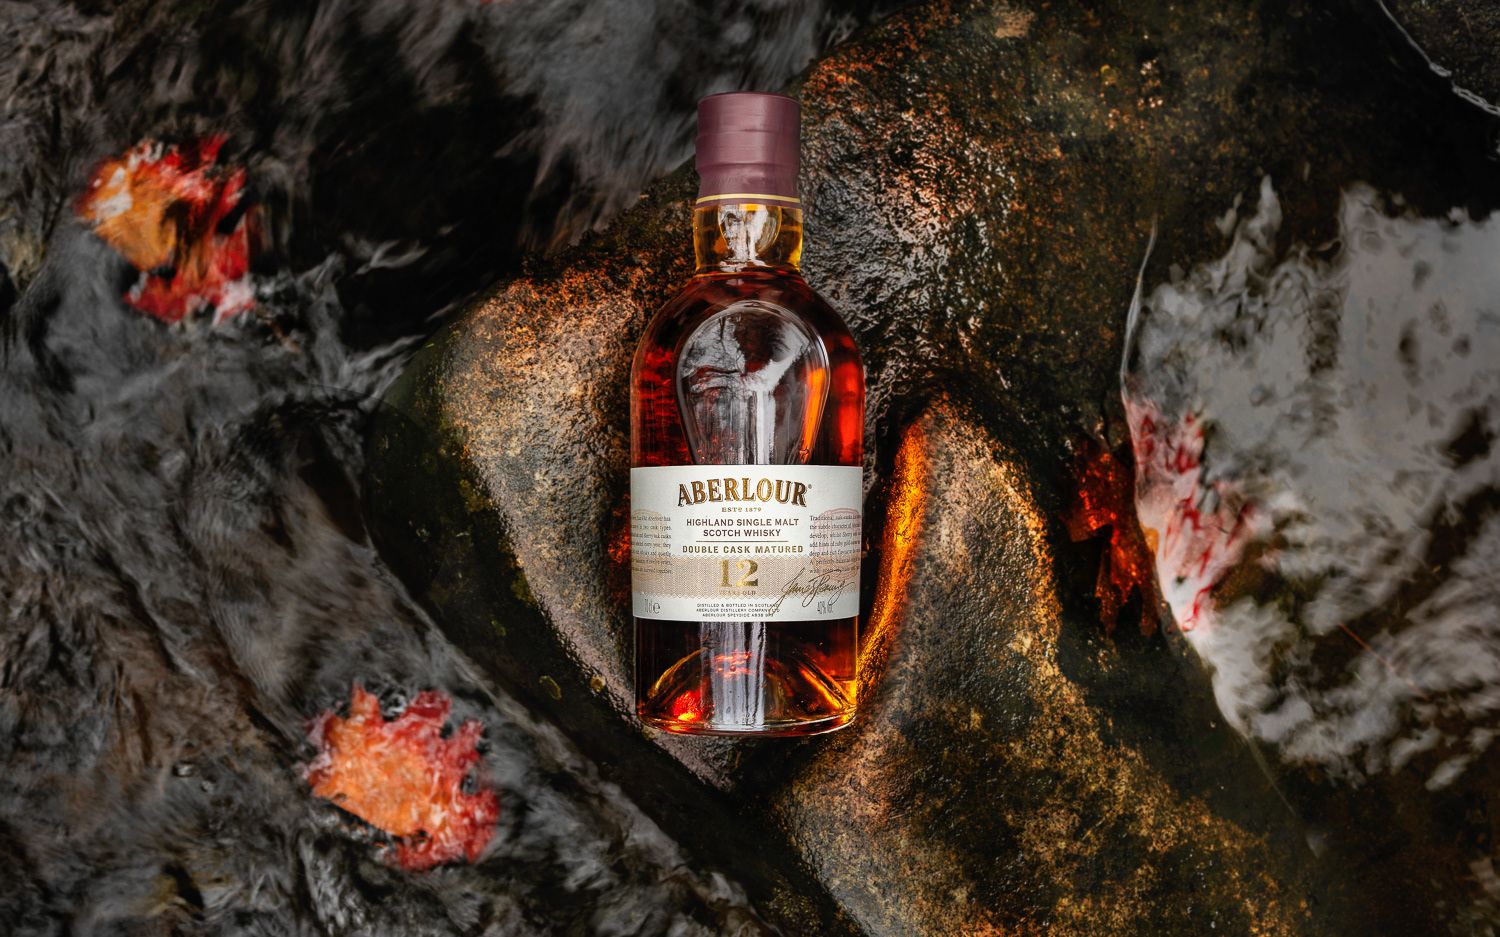 Aberlour 10 Year Old Single Malt Scotch Whisky 70cl, 40% ABV — Old and Rare  Whisky